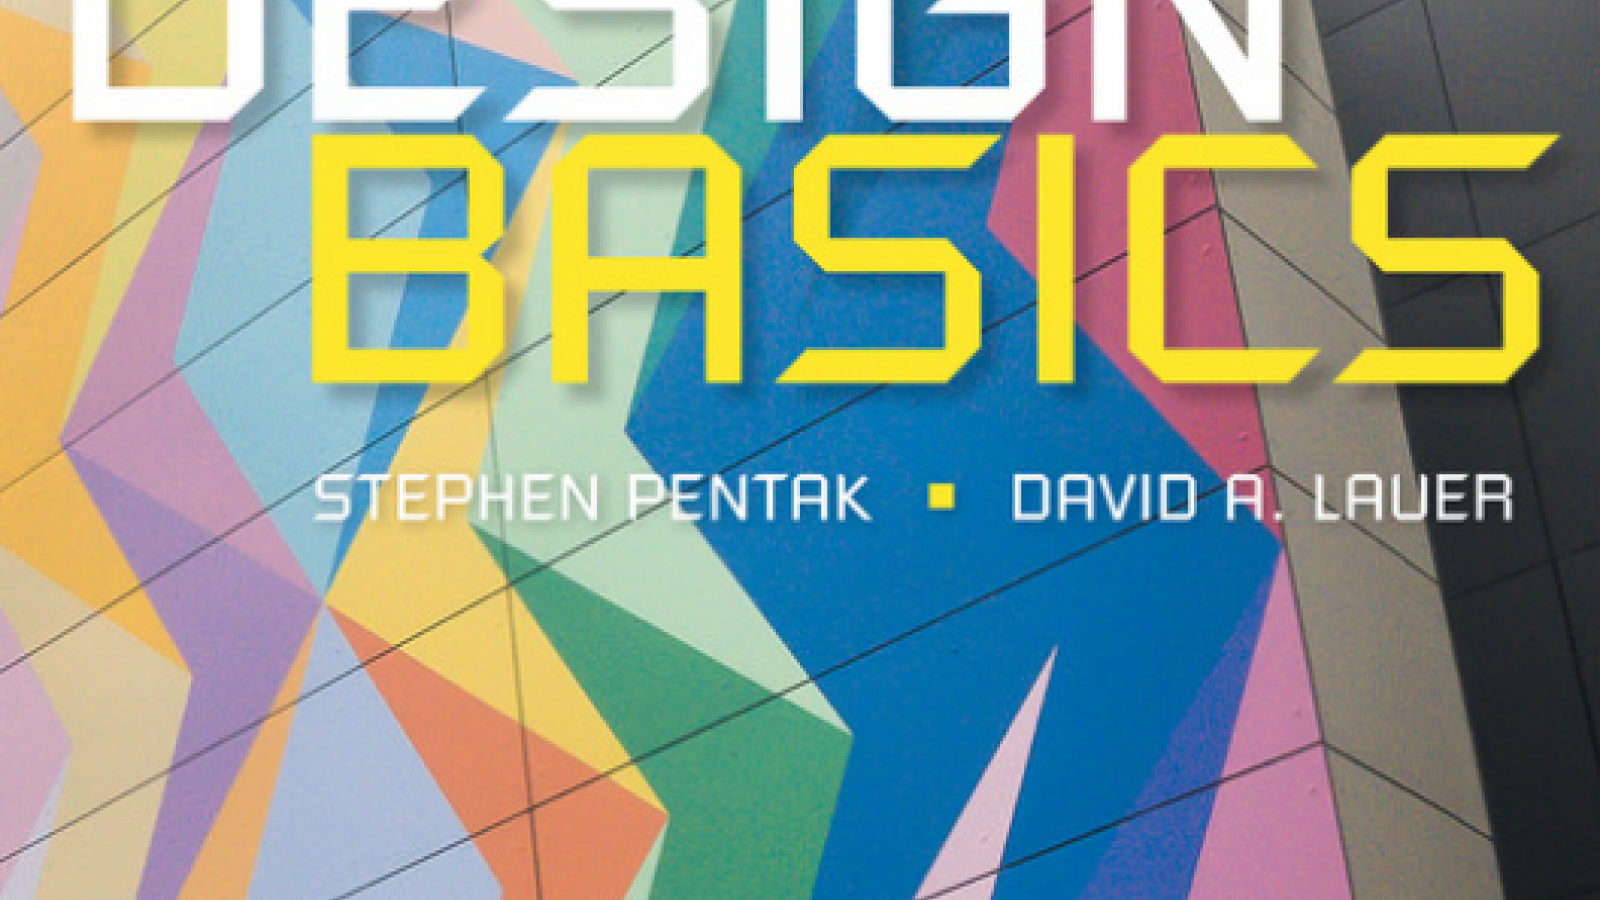 Design Basics, 9th Edition. Published by Cengage